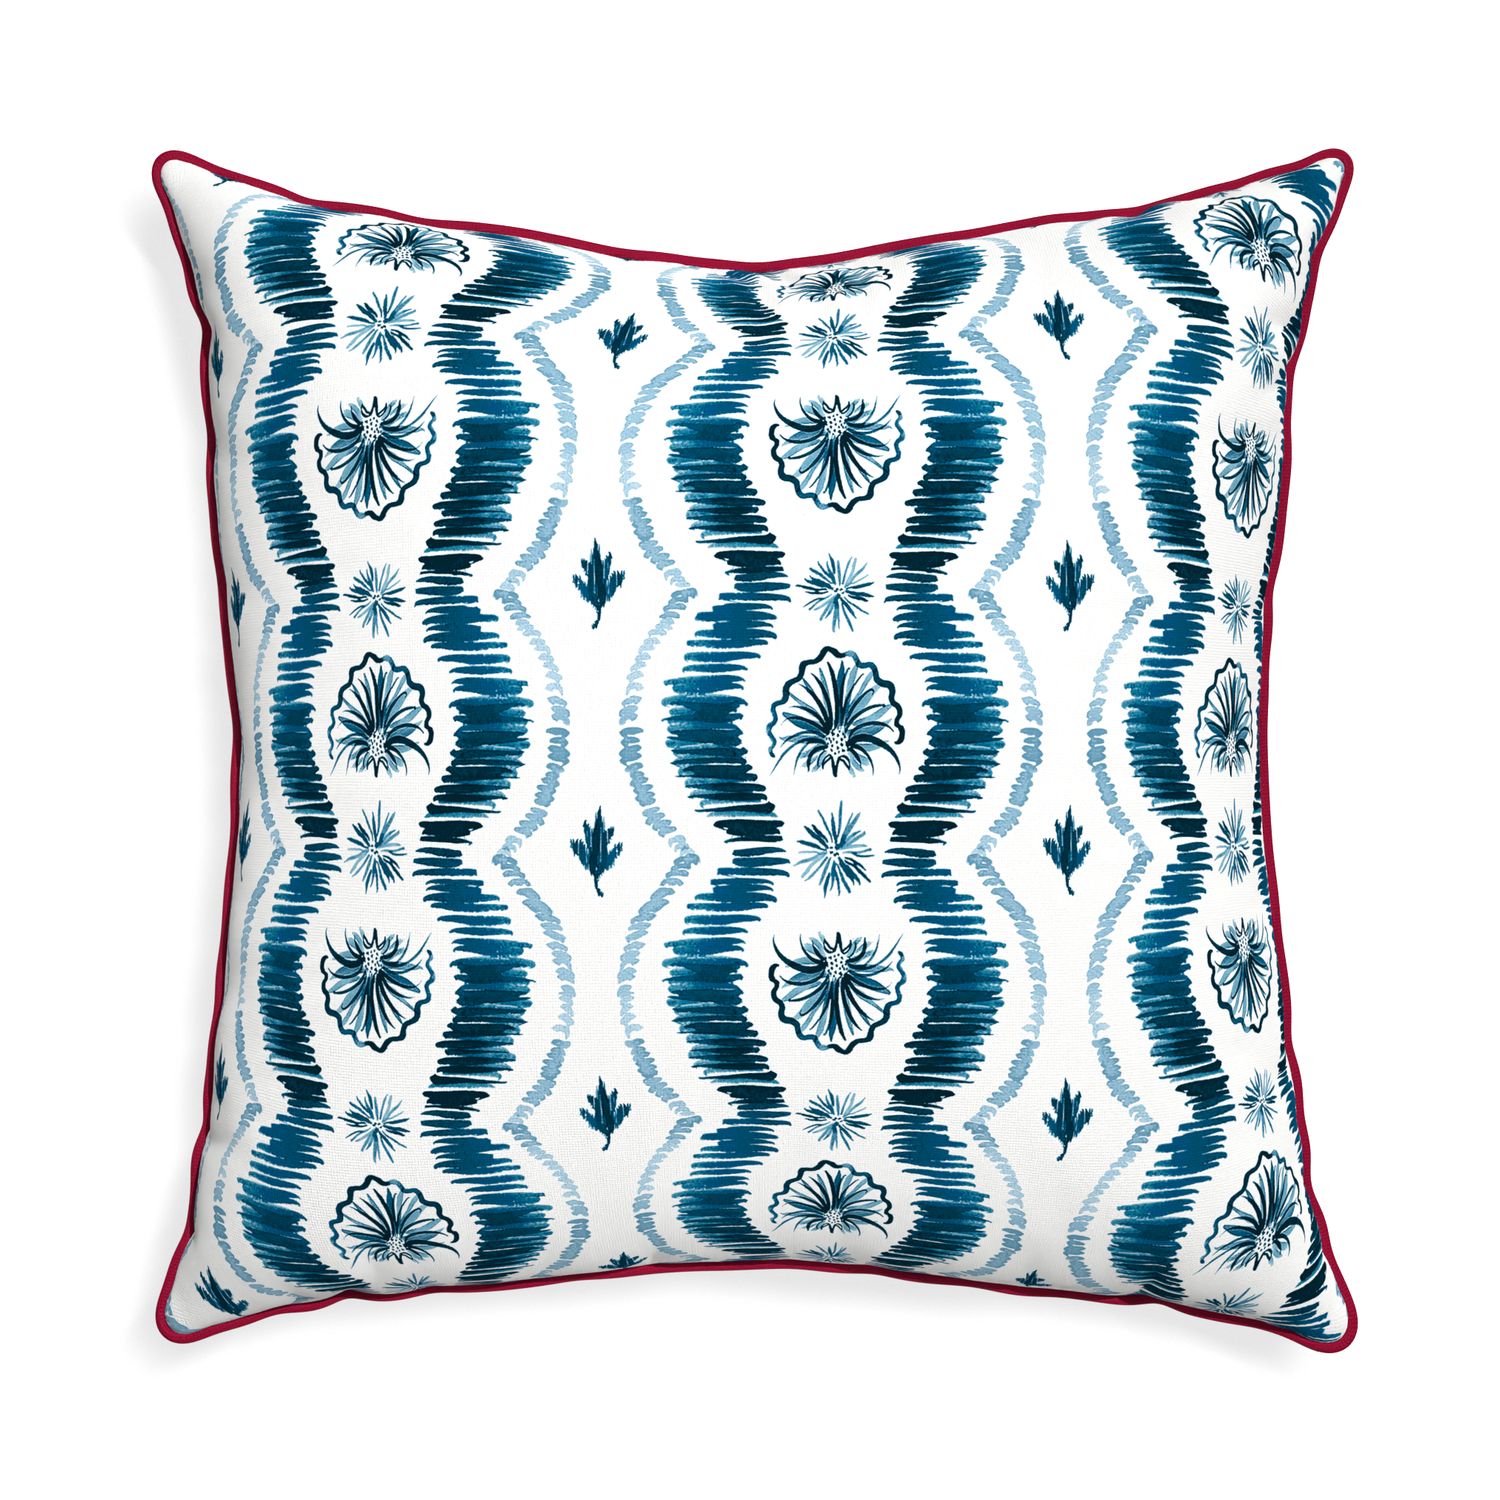 Euro-sham alice custom blue ikatpillow with raspberry piping on white background